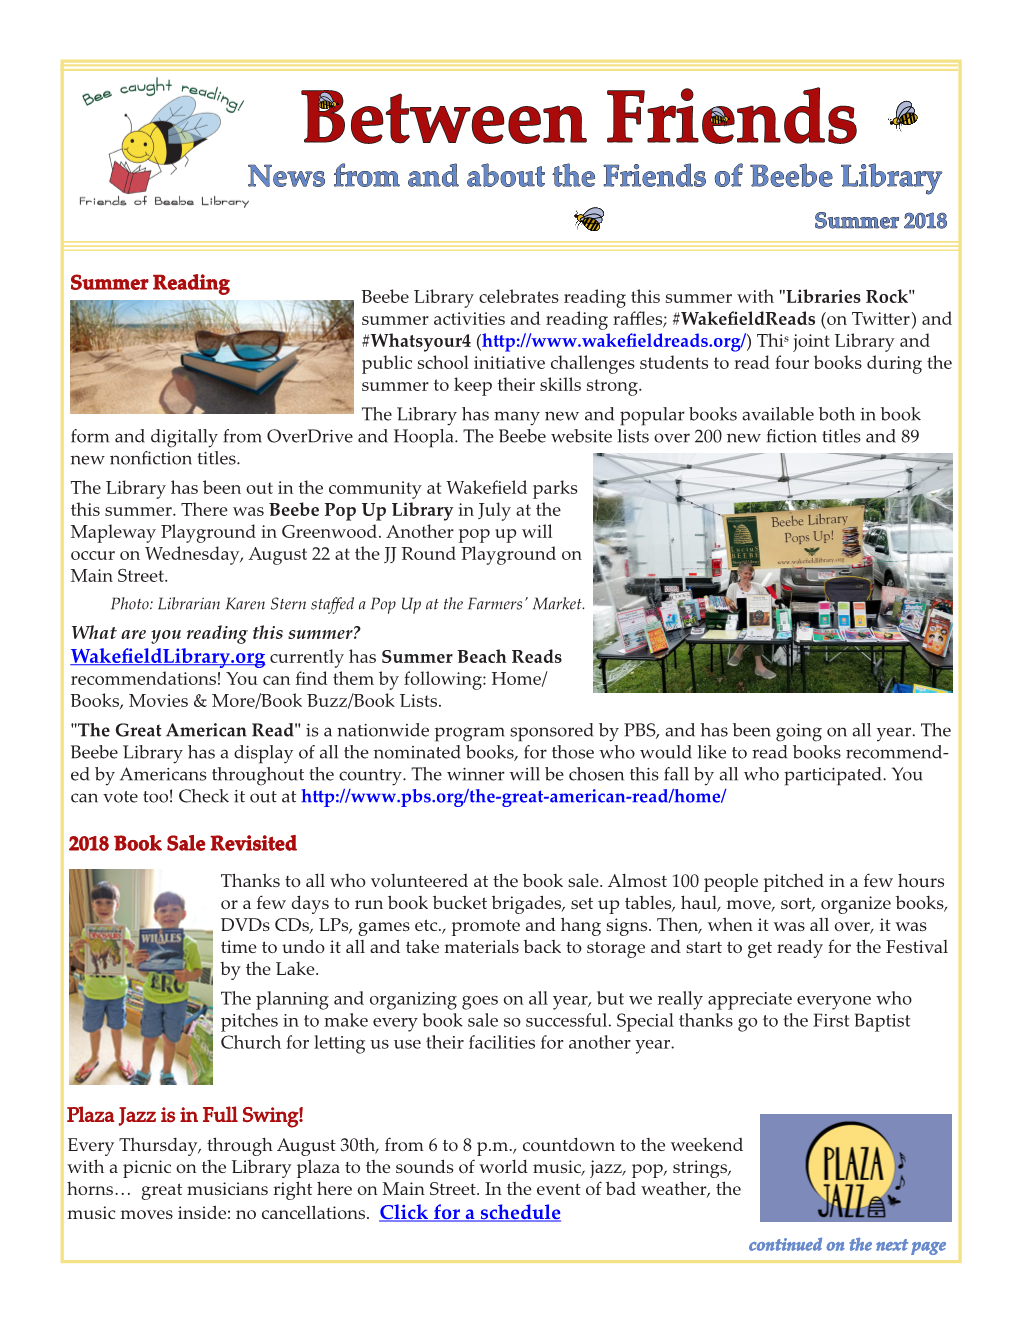 Between Friends News from and About the Friends of Beebe Library Summer 2018